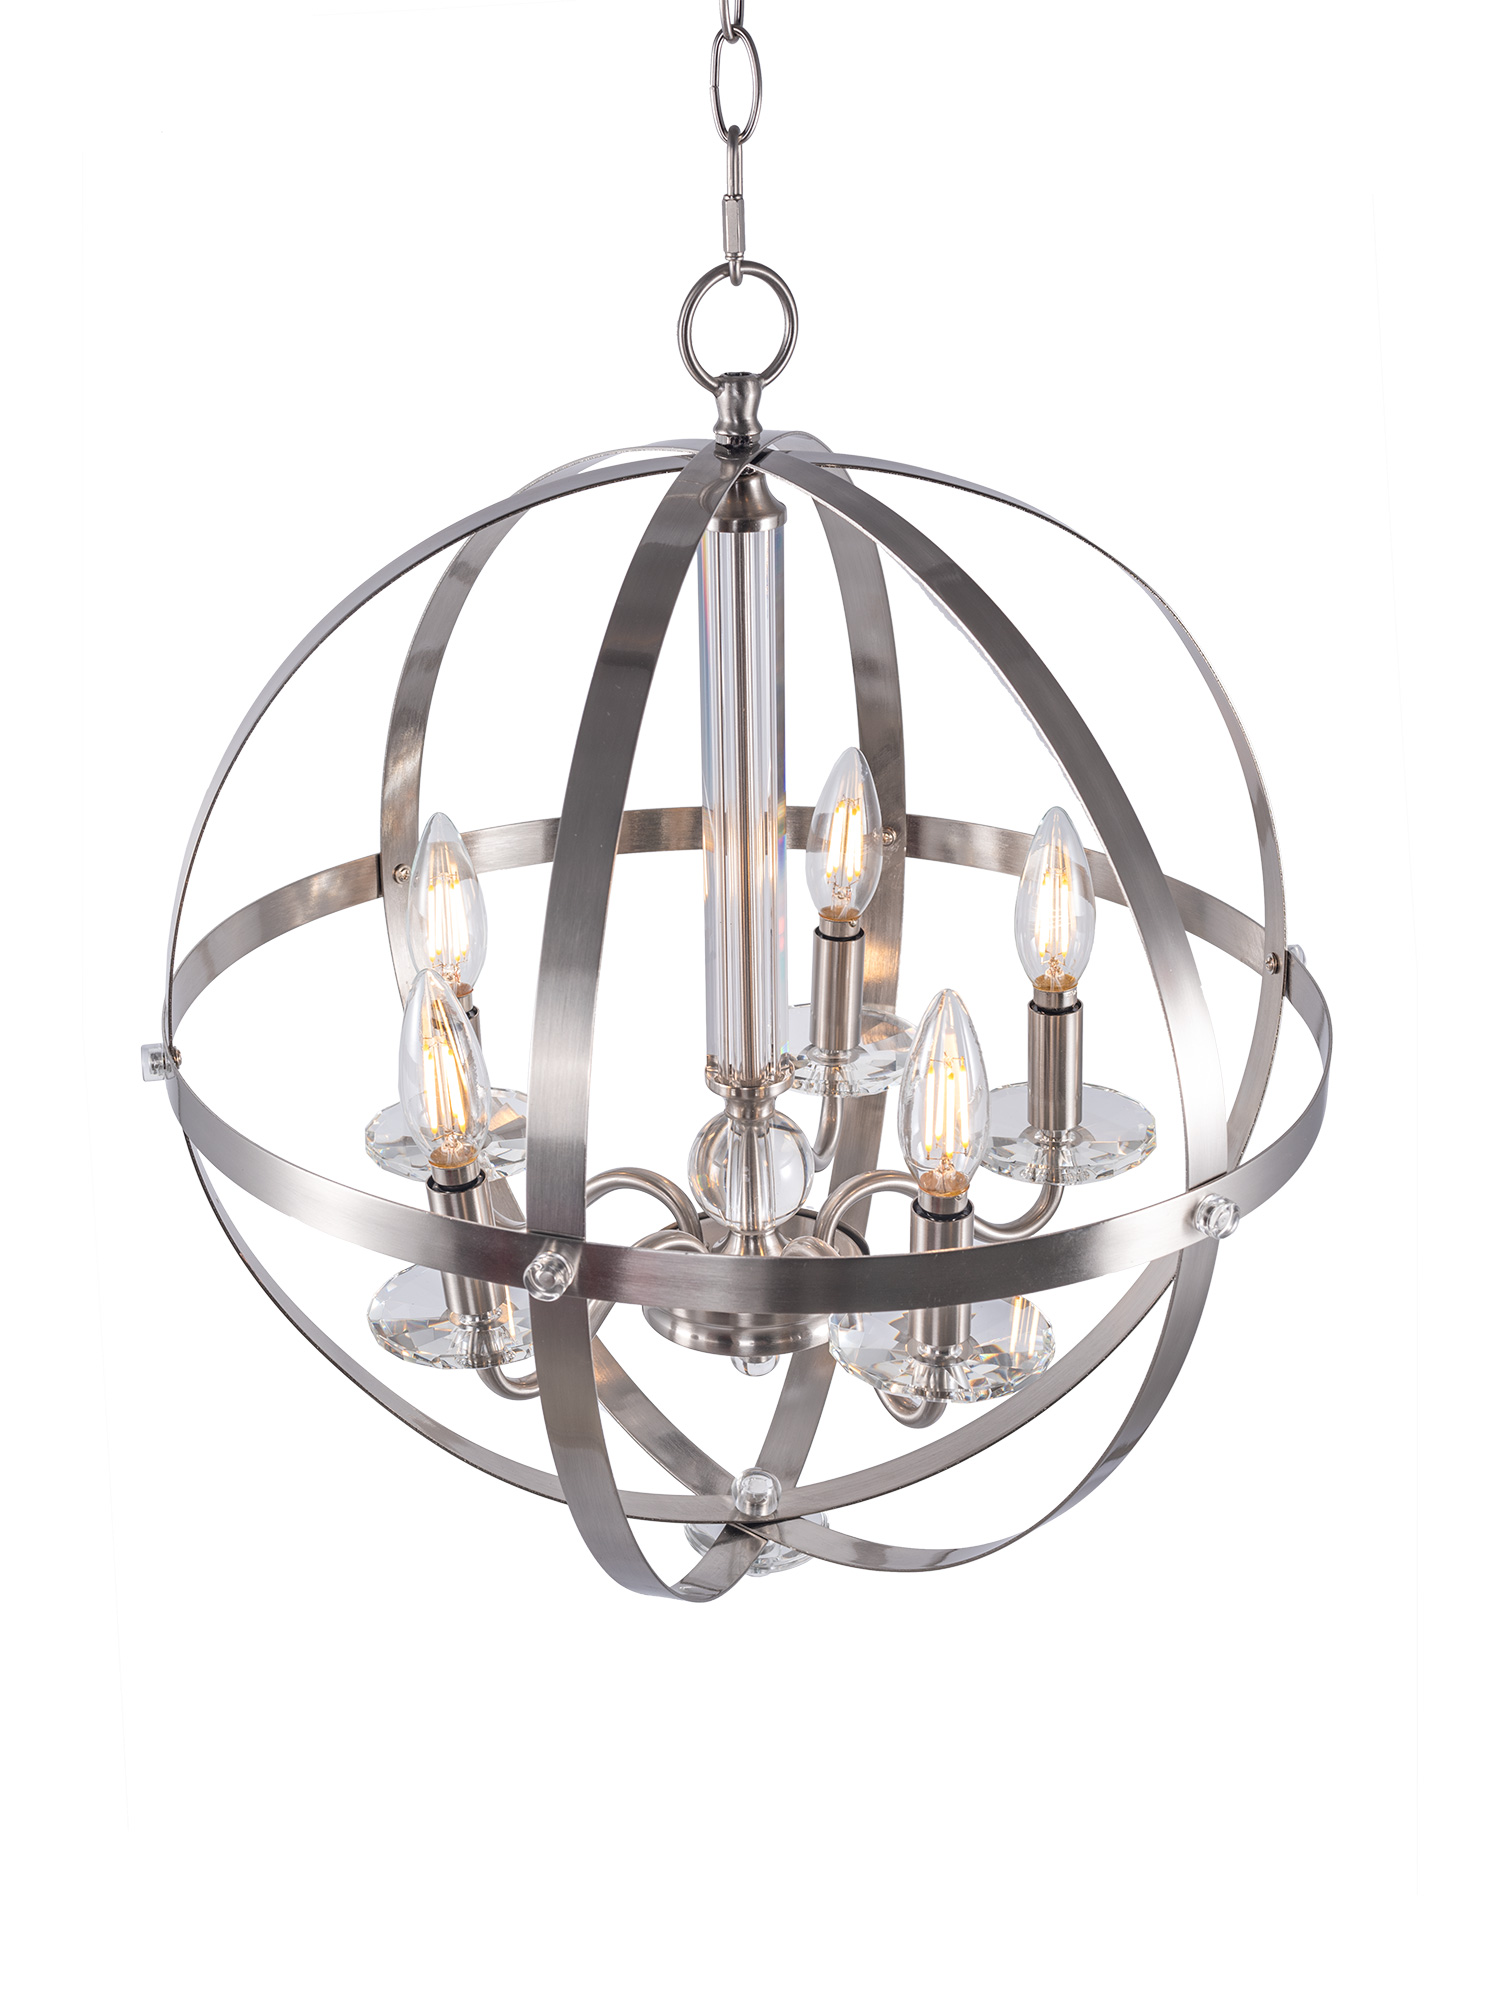 USA-Direct-5-Light-Candle-Style-Globe-Chandelier-Industrial-Rustic-Indoor-Pendant-Light-Without-Bulb-1877125-7